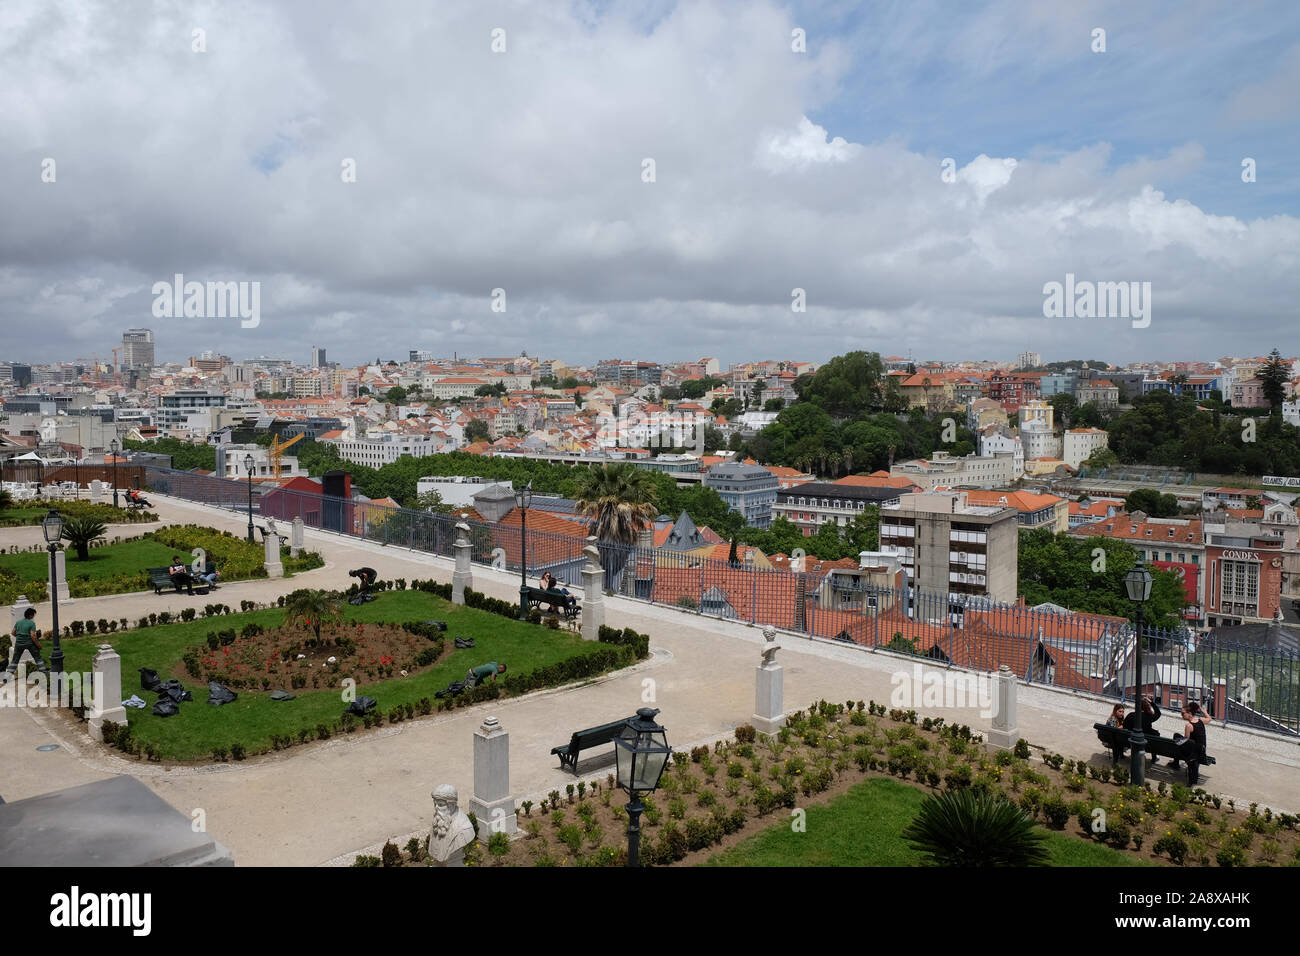 Cityscape of lisbon, portugal from public gardens, overlooking terracotta roofs Stock Photo